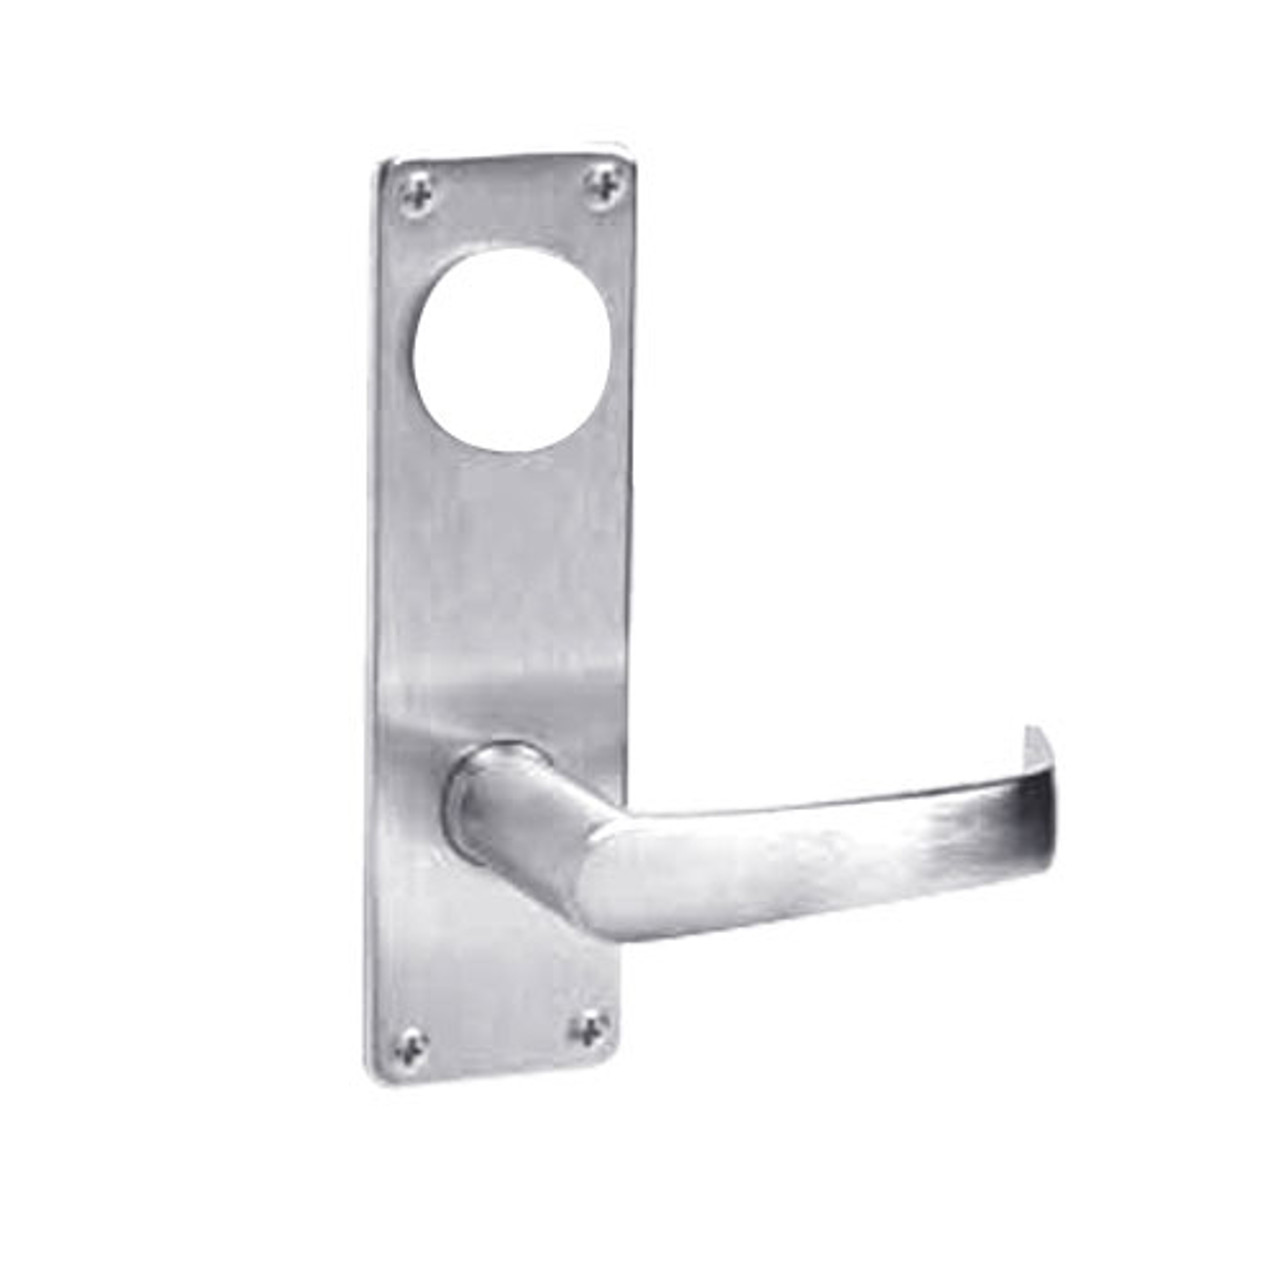 ML2048-NSN-625-CL7 Corbin Russwin ML2000 Series IC 7-Pin Less Core Mortise Entrance Locksets with Newport Lever in Bright Chrome